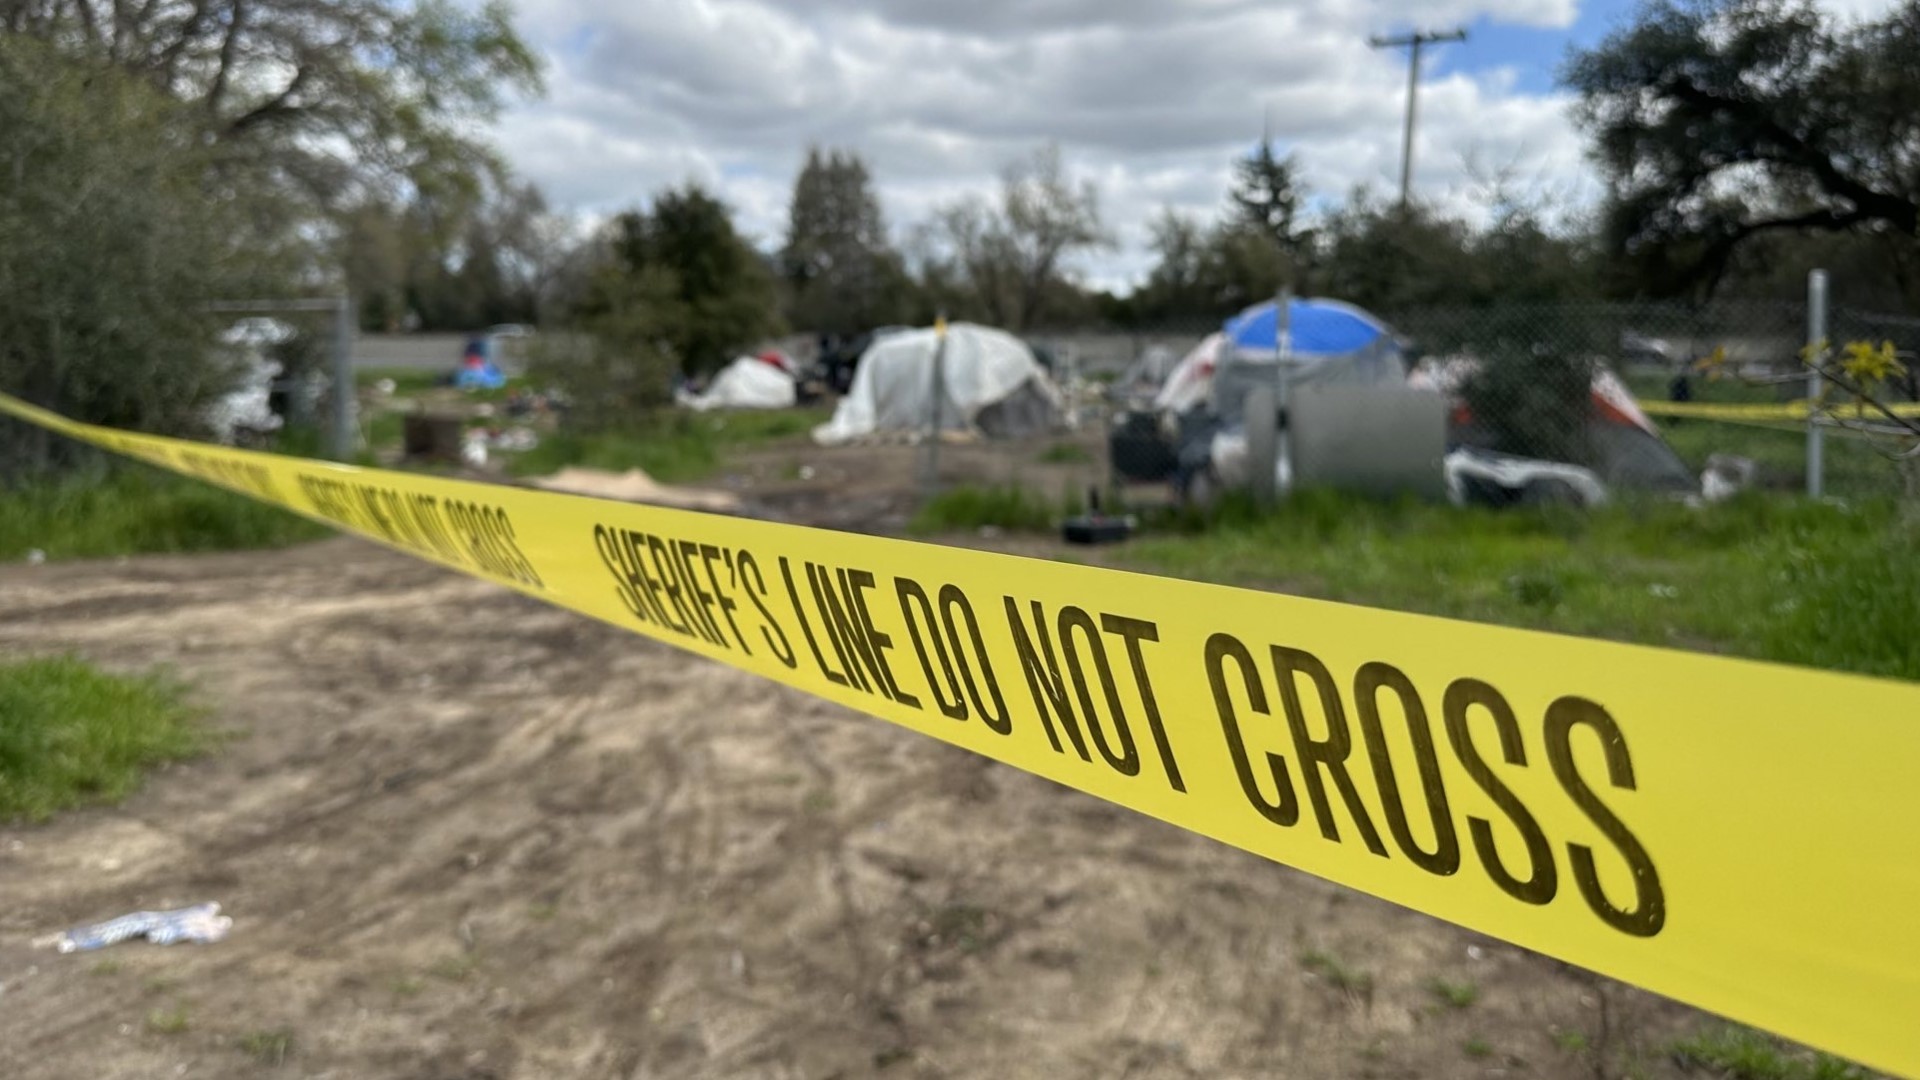 Sacramento County Sheriff's Office deputies said a woman was found dead at an encampment of unhoused people in North Highlands.